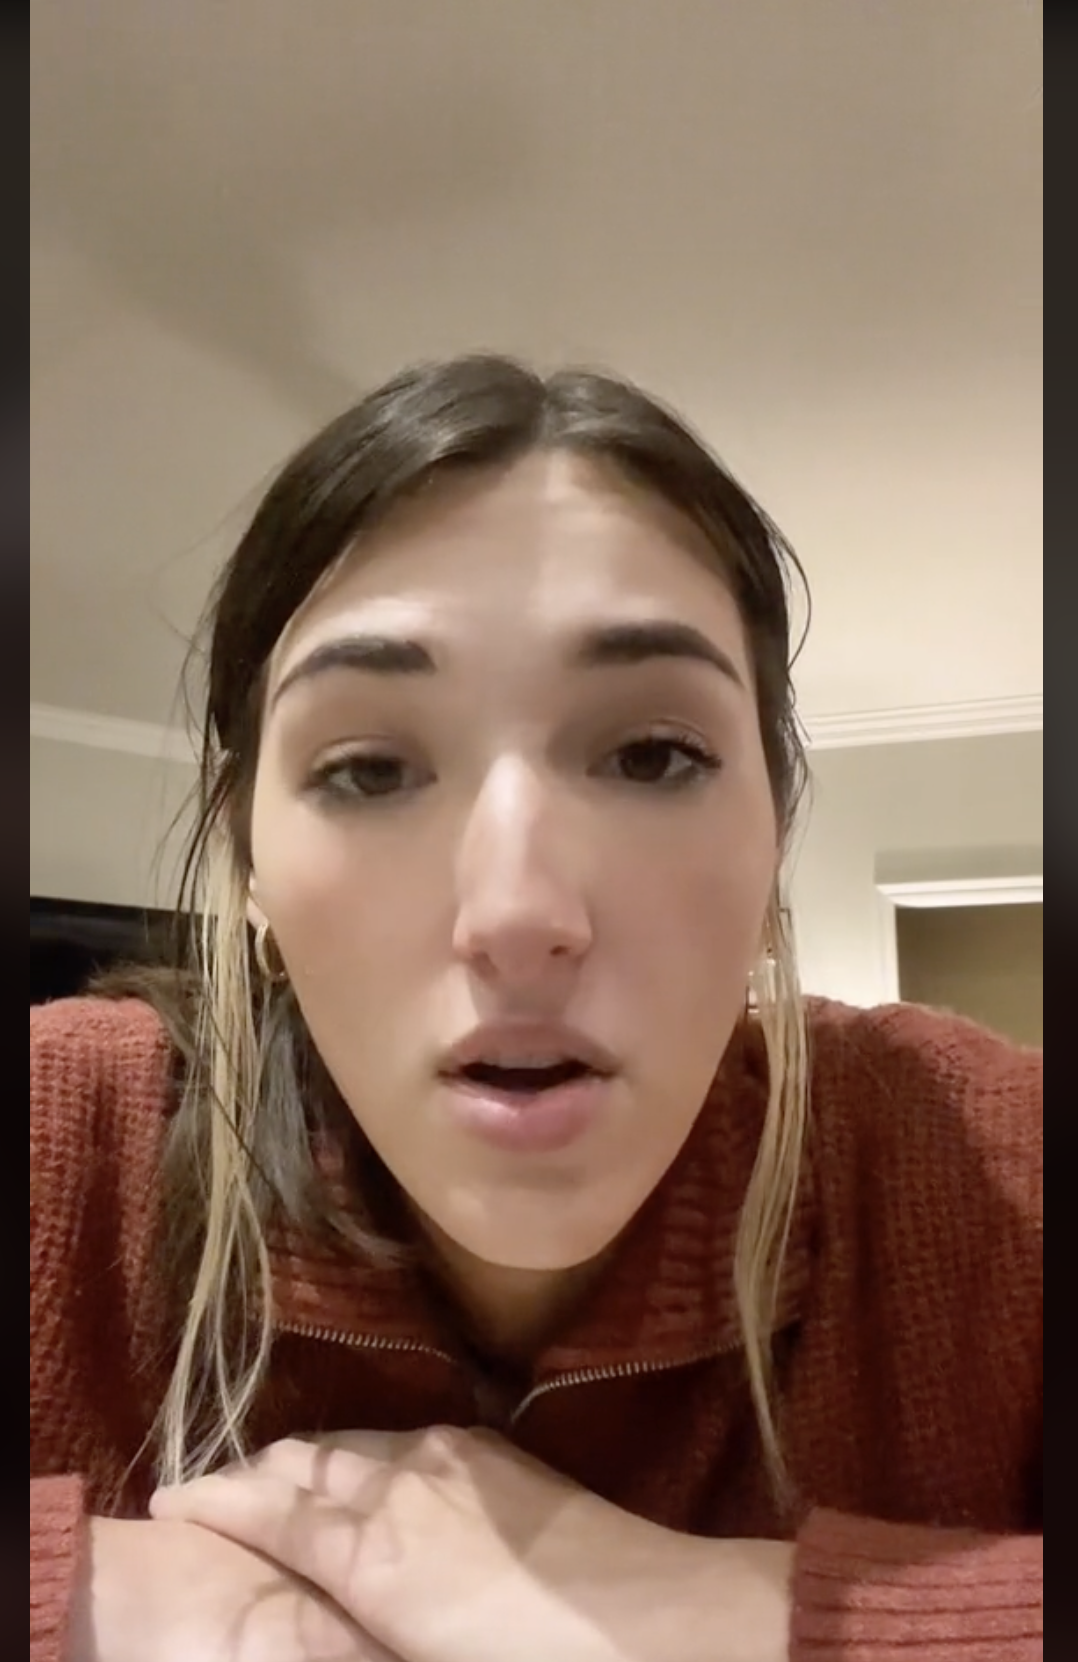 Alaina sharing her moving story, as seen in a video dated December 2, 2022 | Source: TikTok/alaina_plzz